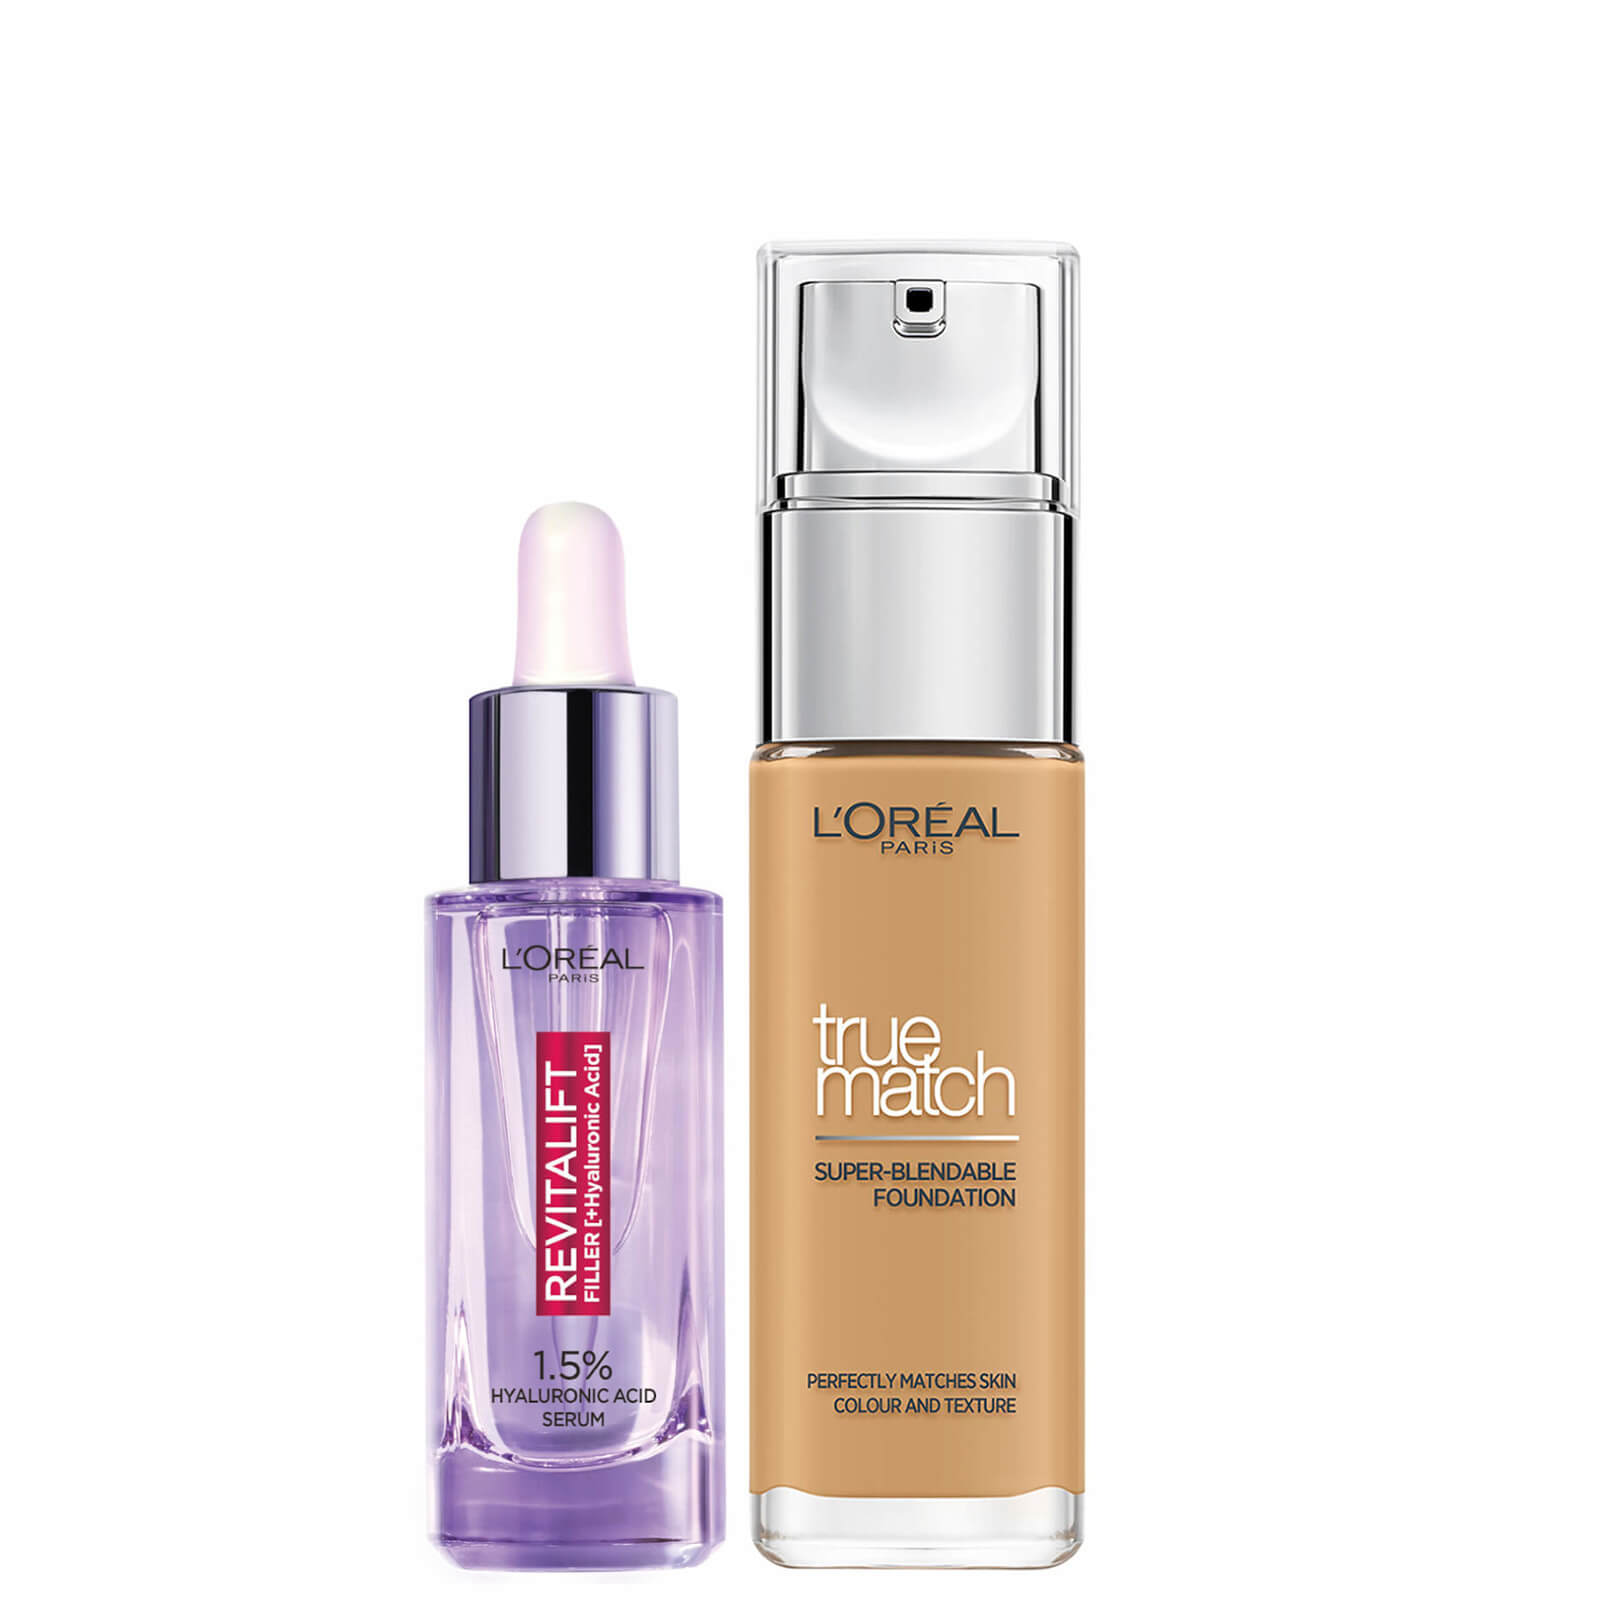 Photos - Foundation & Concealer LOreal L’Oreal Paris Hyaluronic Acid Filler Serum and True Match Hyaluronic Acid 